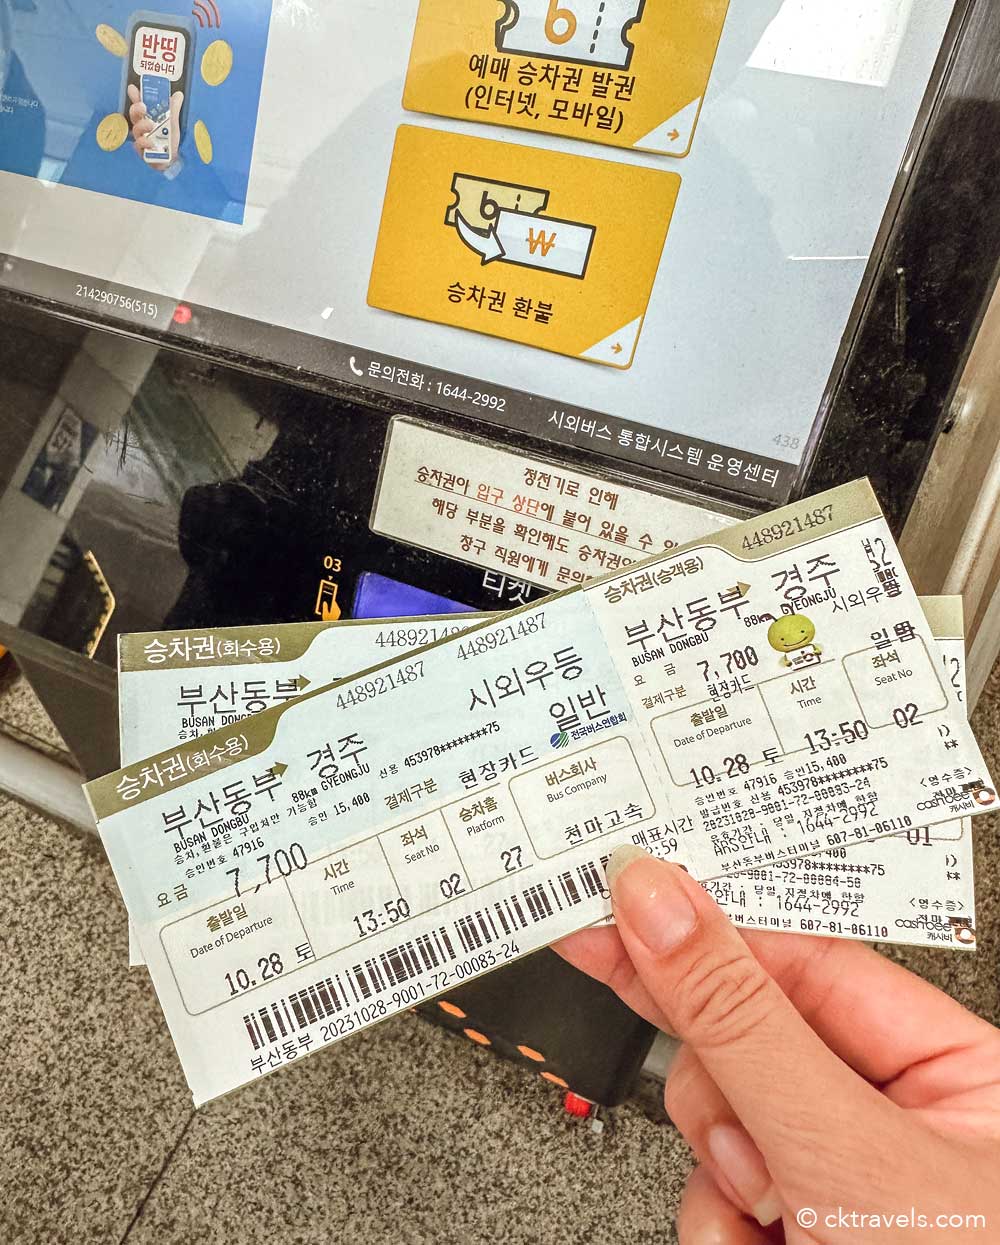 tickets for Busan to Gyeongju at Busan Central bus station South Korea